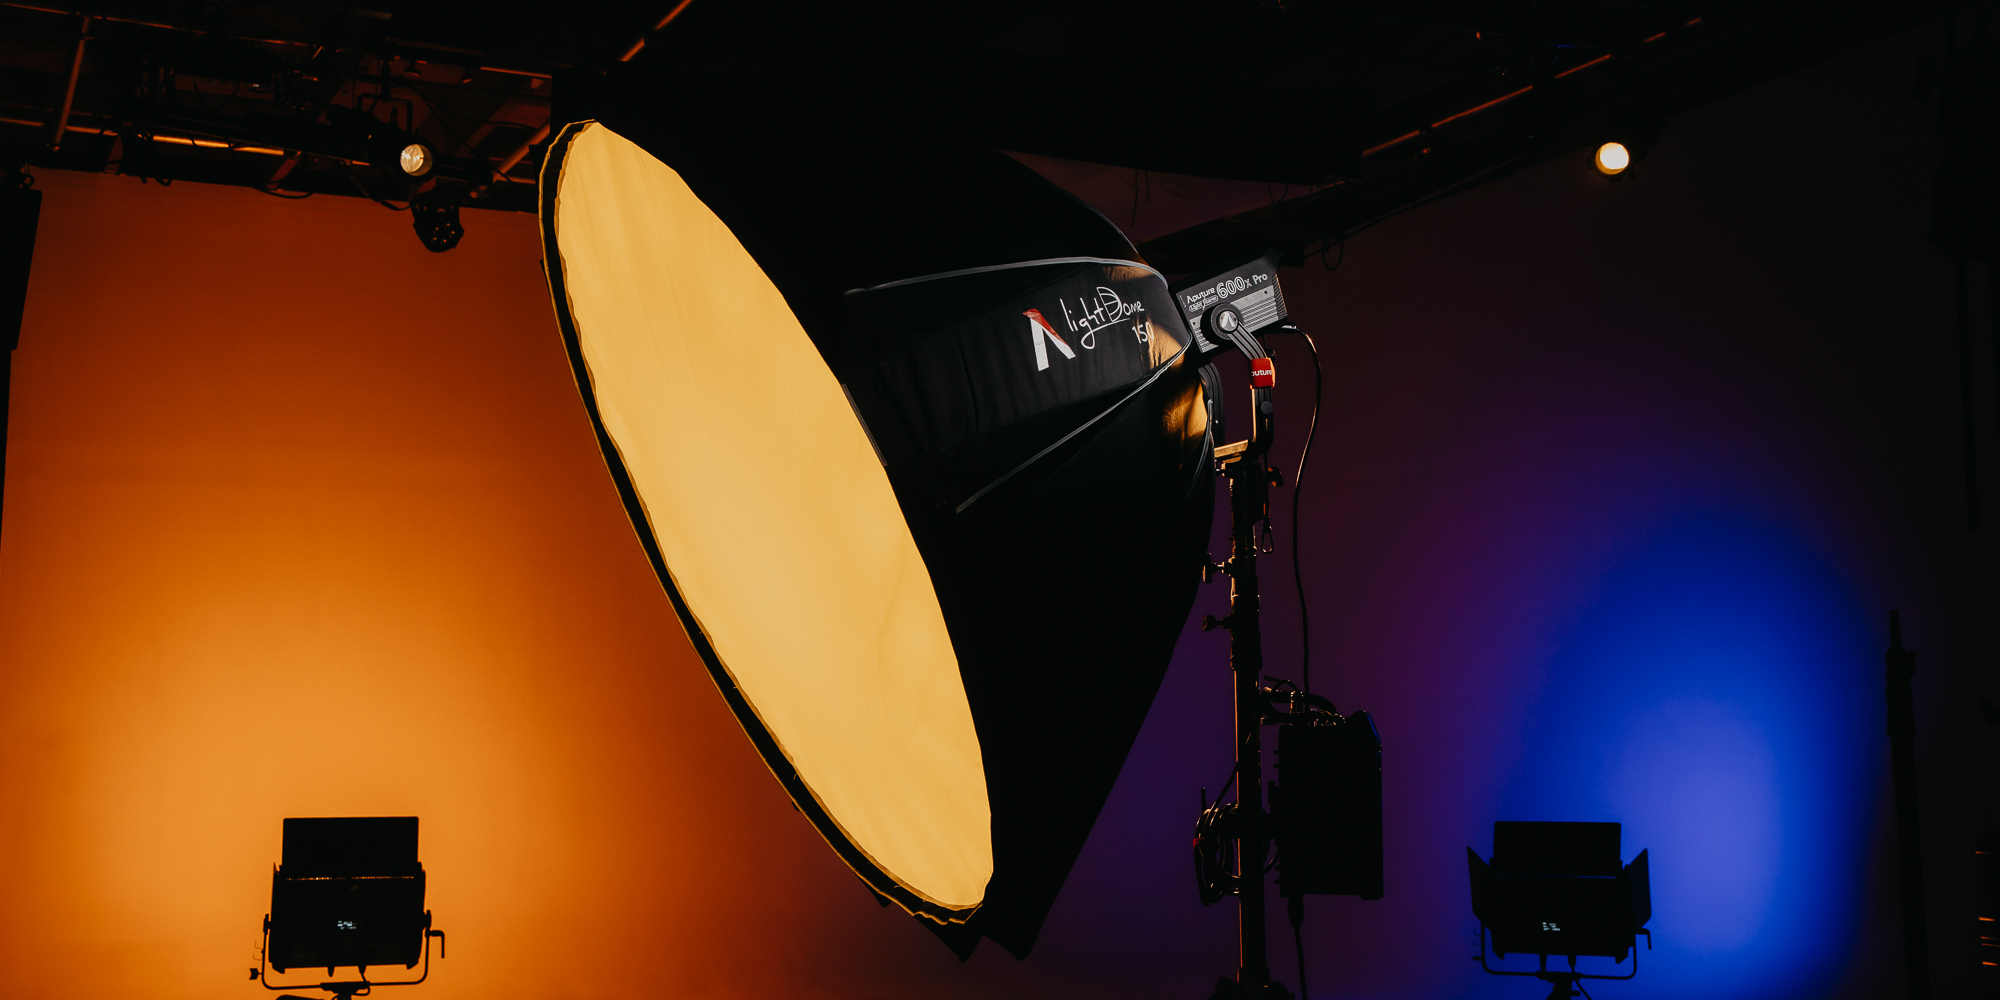 Aputure Light Storm LS 600x Pro LED Lamp - V-mount - Changeable weather is not afraid of it!